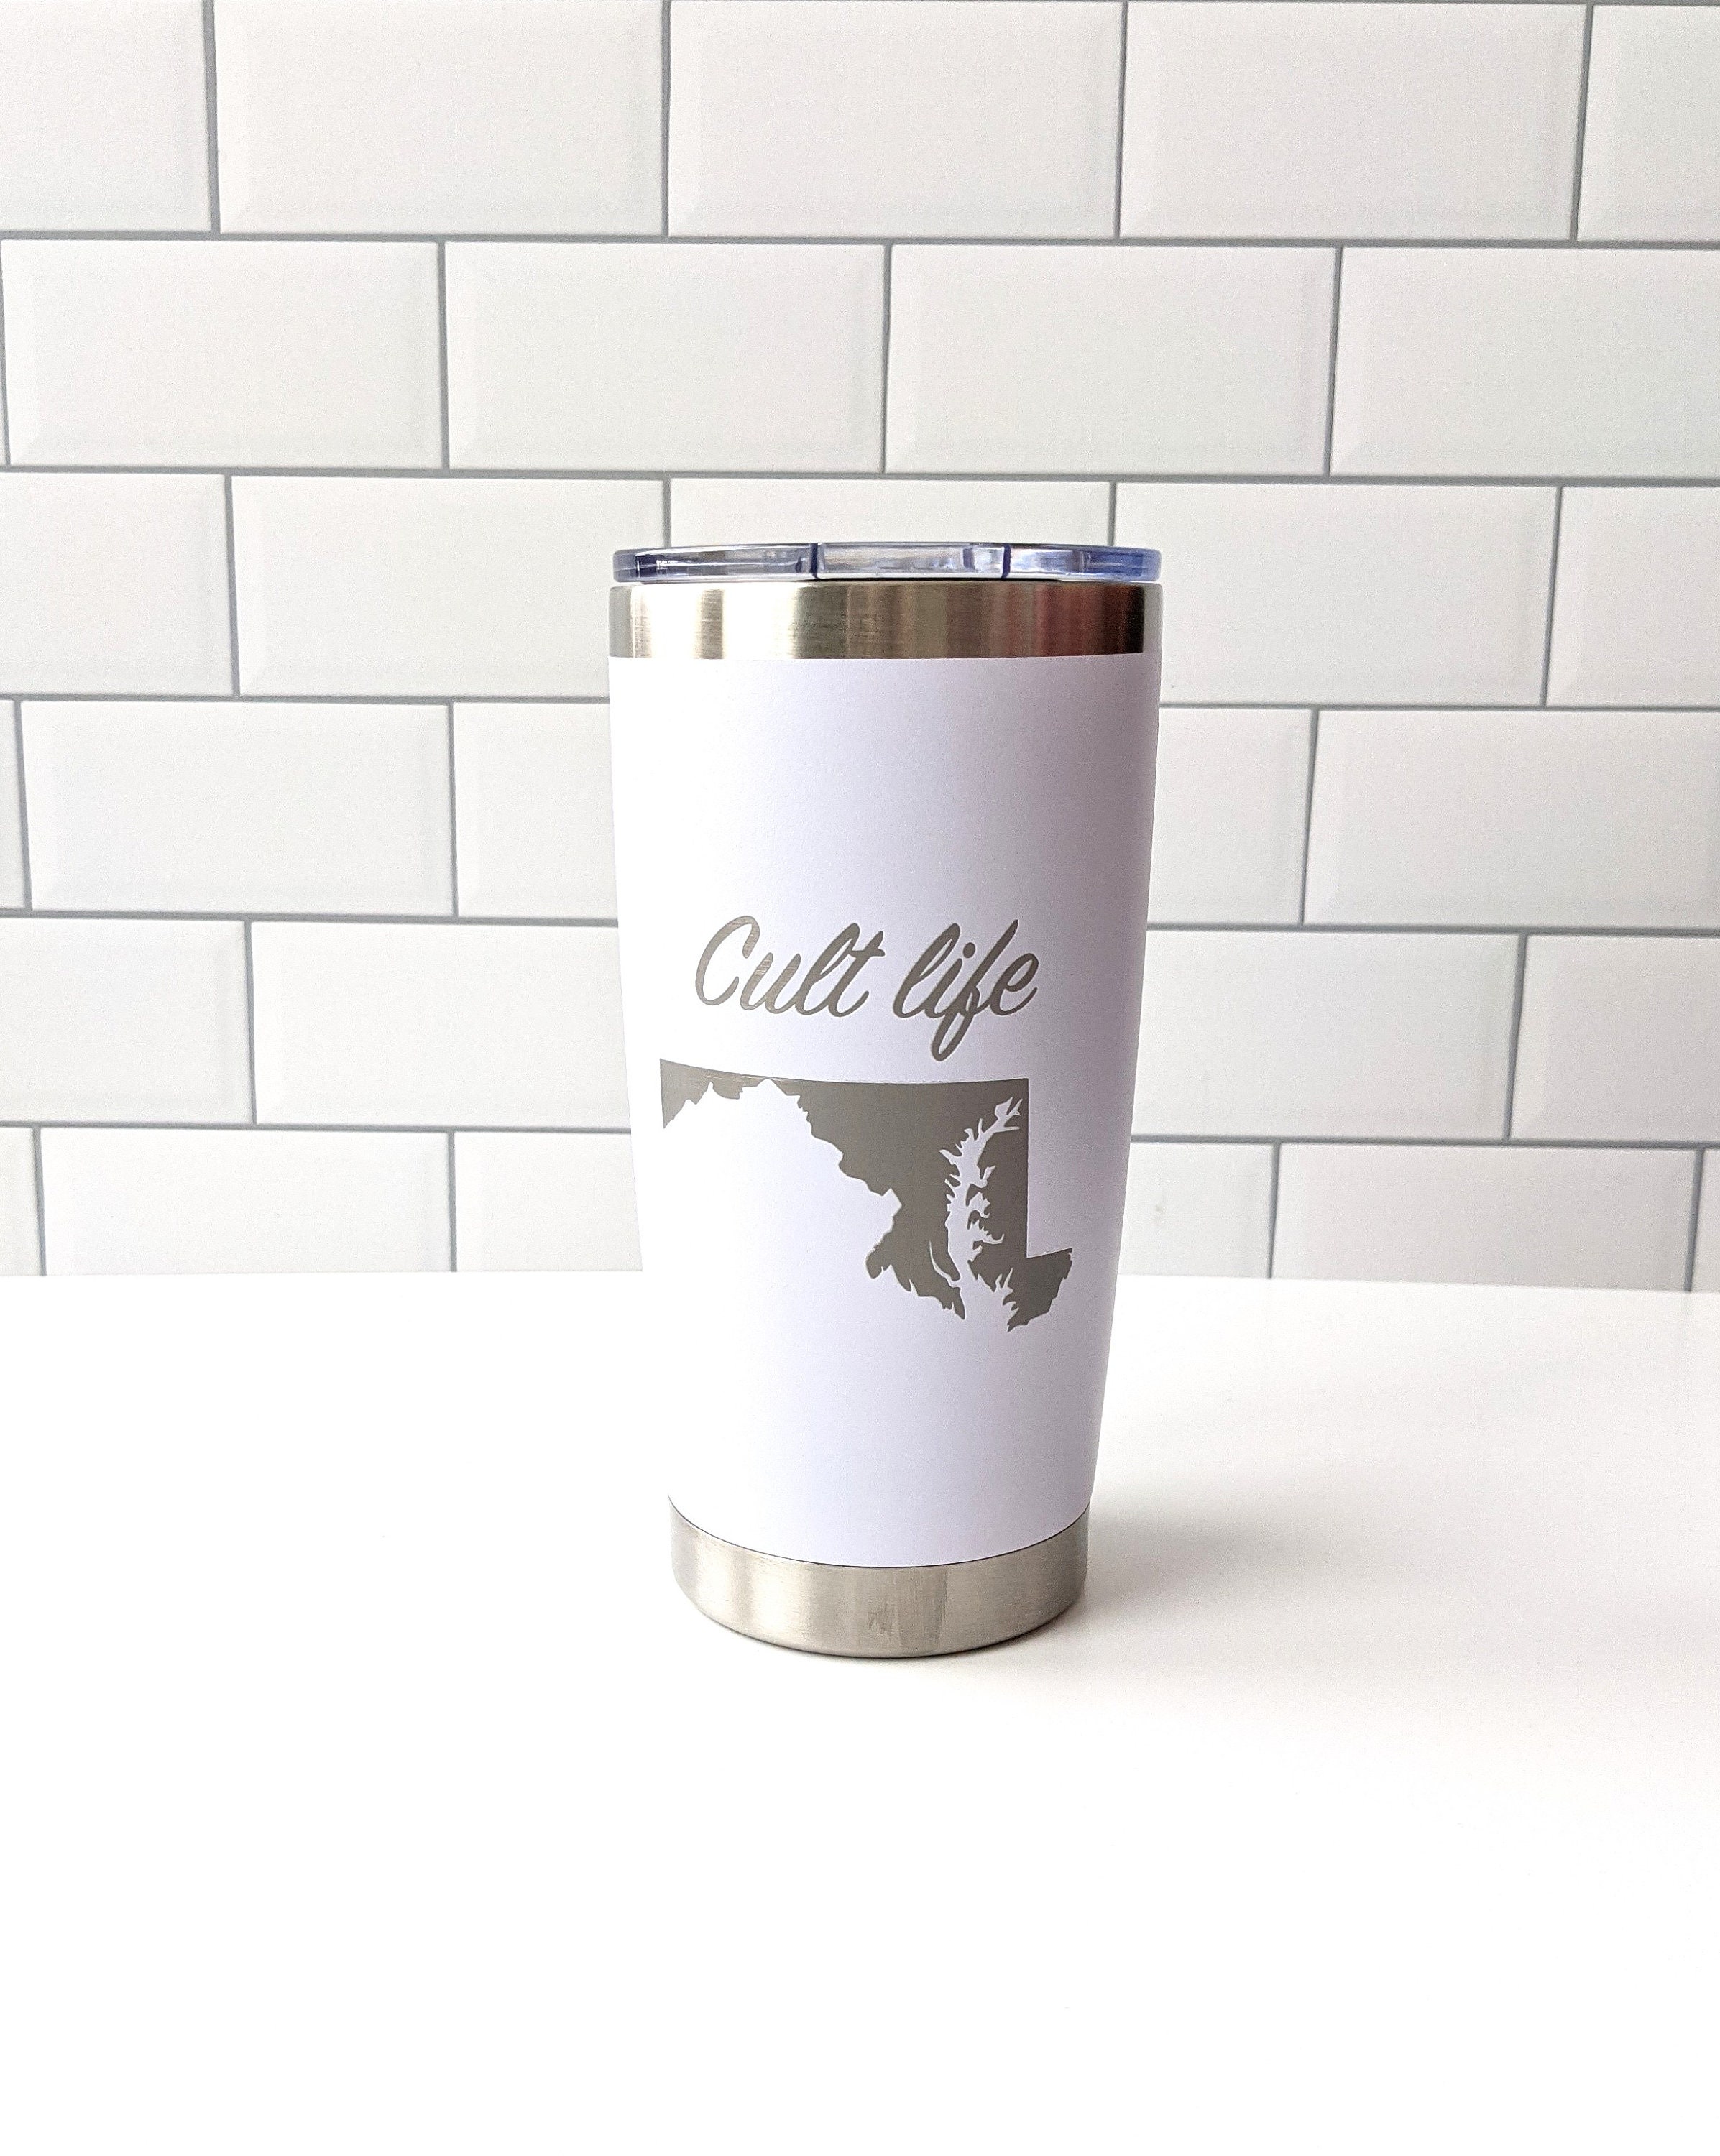 The Cult-Favorite Yeti Coffee Tumbler Keeps My Drinks Hot for Hours: Review